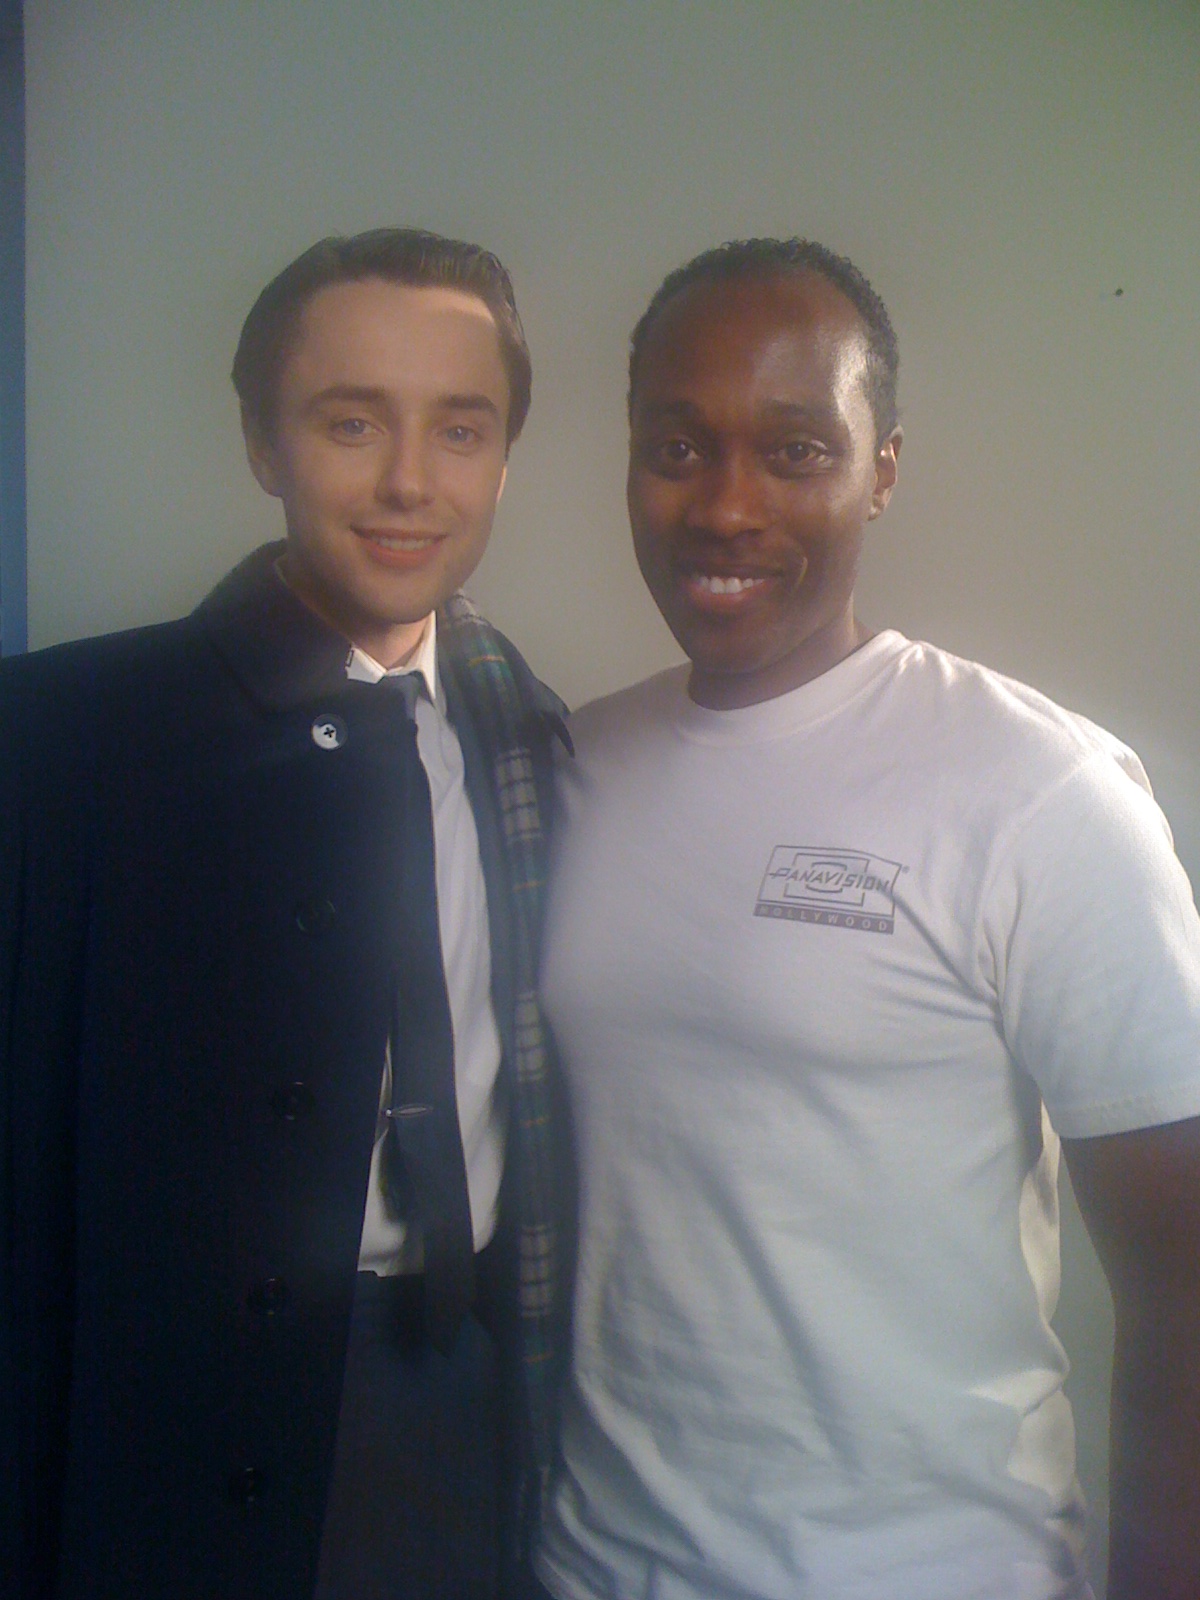 On The MADMEN Set. Working as an editor on the MADMEN BluRay for Seasons two and three. Left: Vincent Kartheiser Right: Abdul Stone Jackson